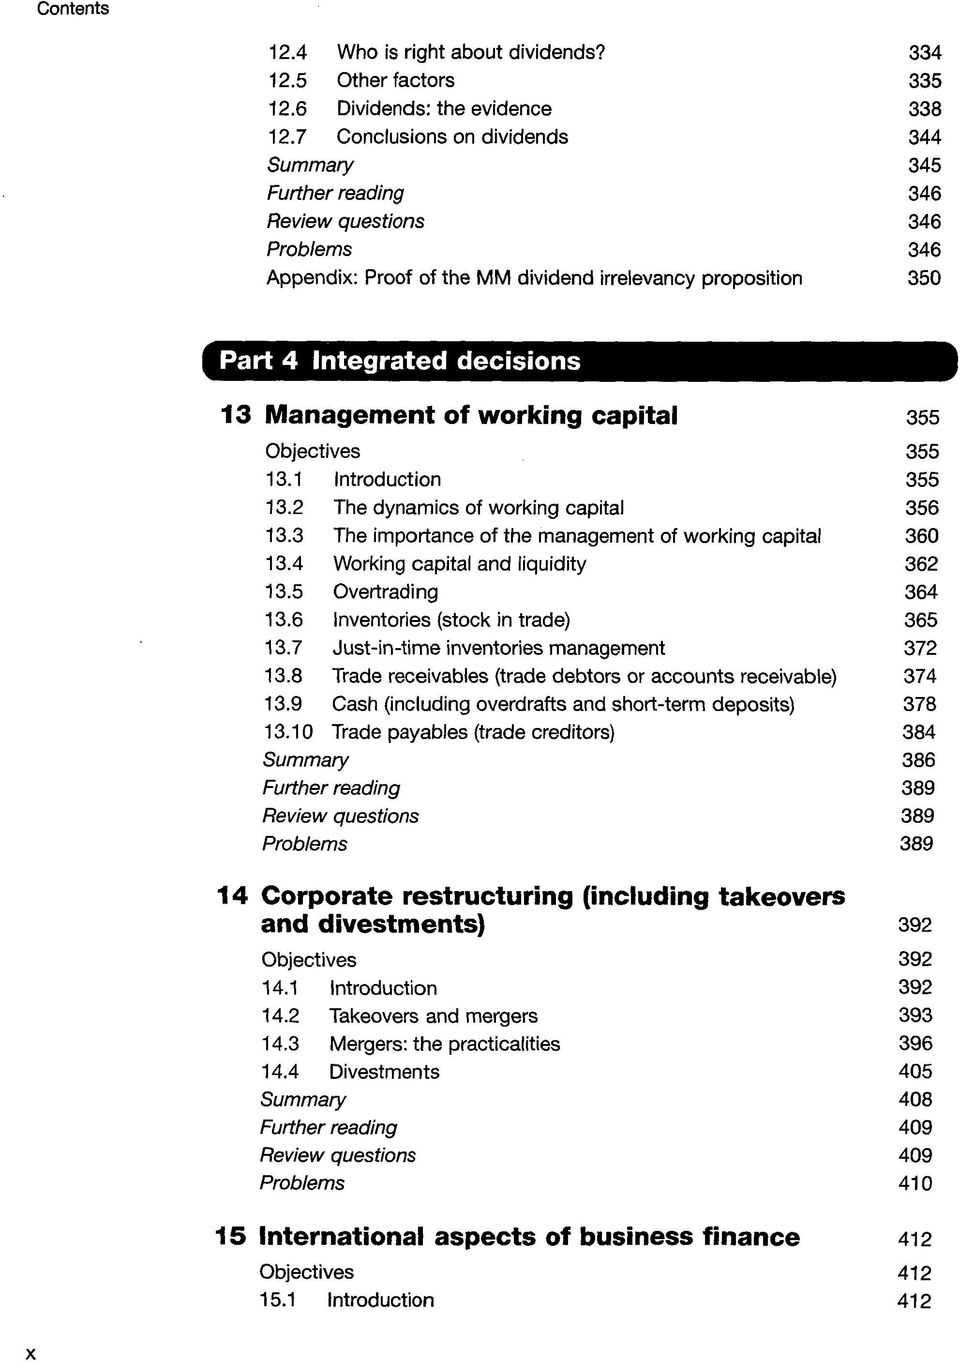 Objectives 355 13.1 Introduction 355 13.2 The dynamics of working capital 356 13.3 The importance of the management of working capital 360 13.4 Working capital and liquidity 362 13.